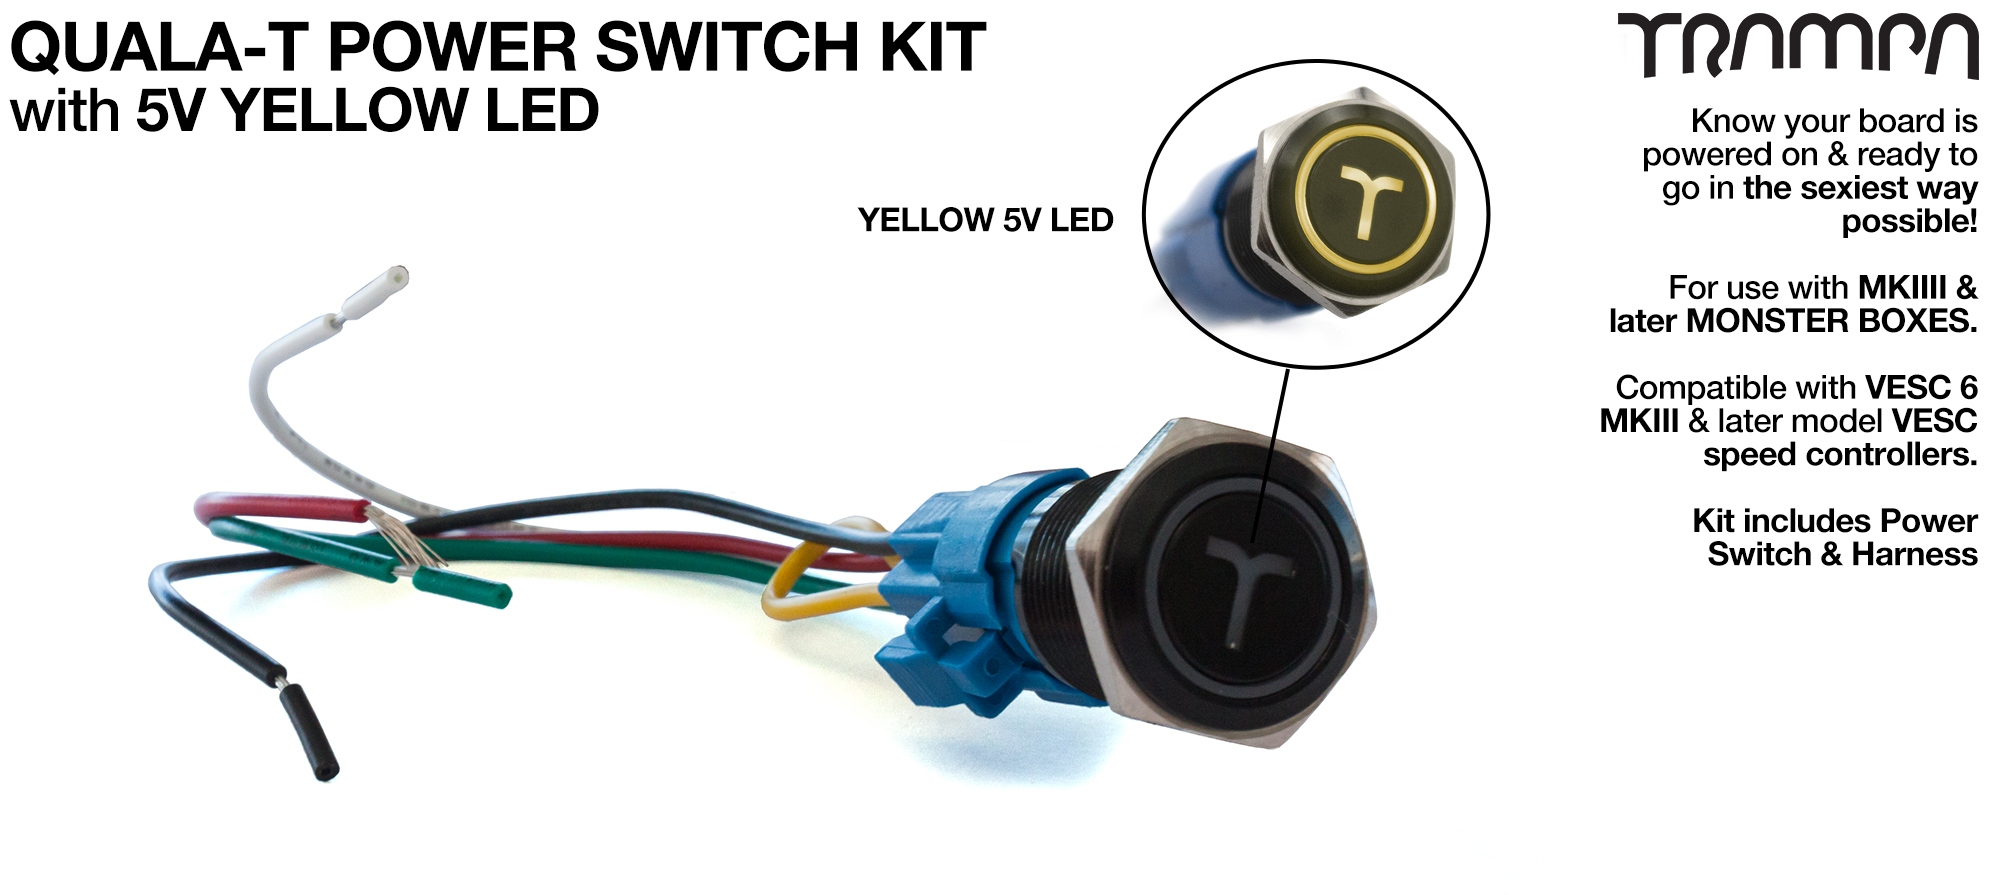 YELLOW LED QUALA-T Power Switch Kit with 16mm Fixing Nut & Cable Harness 